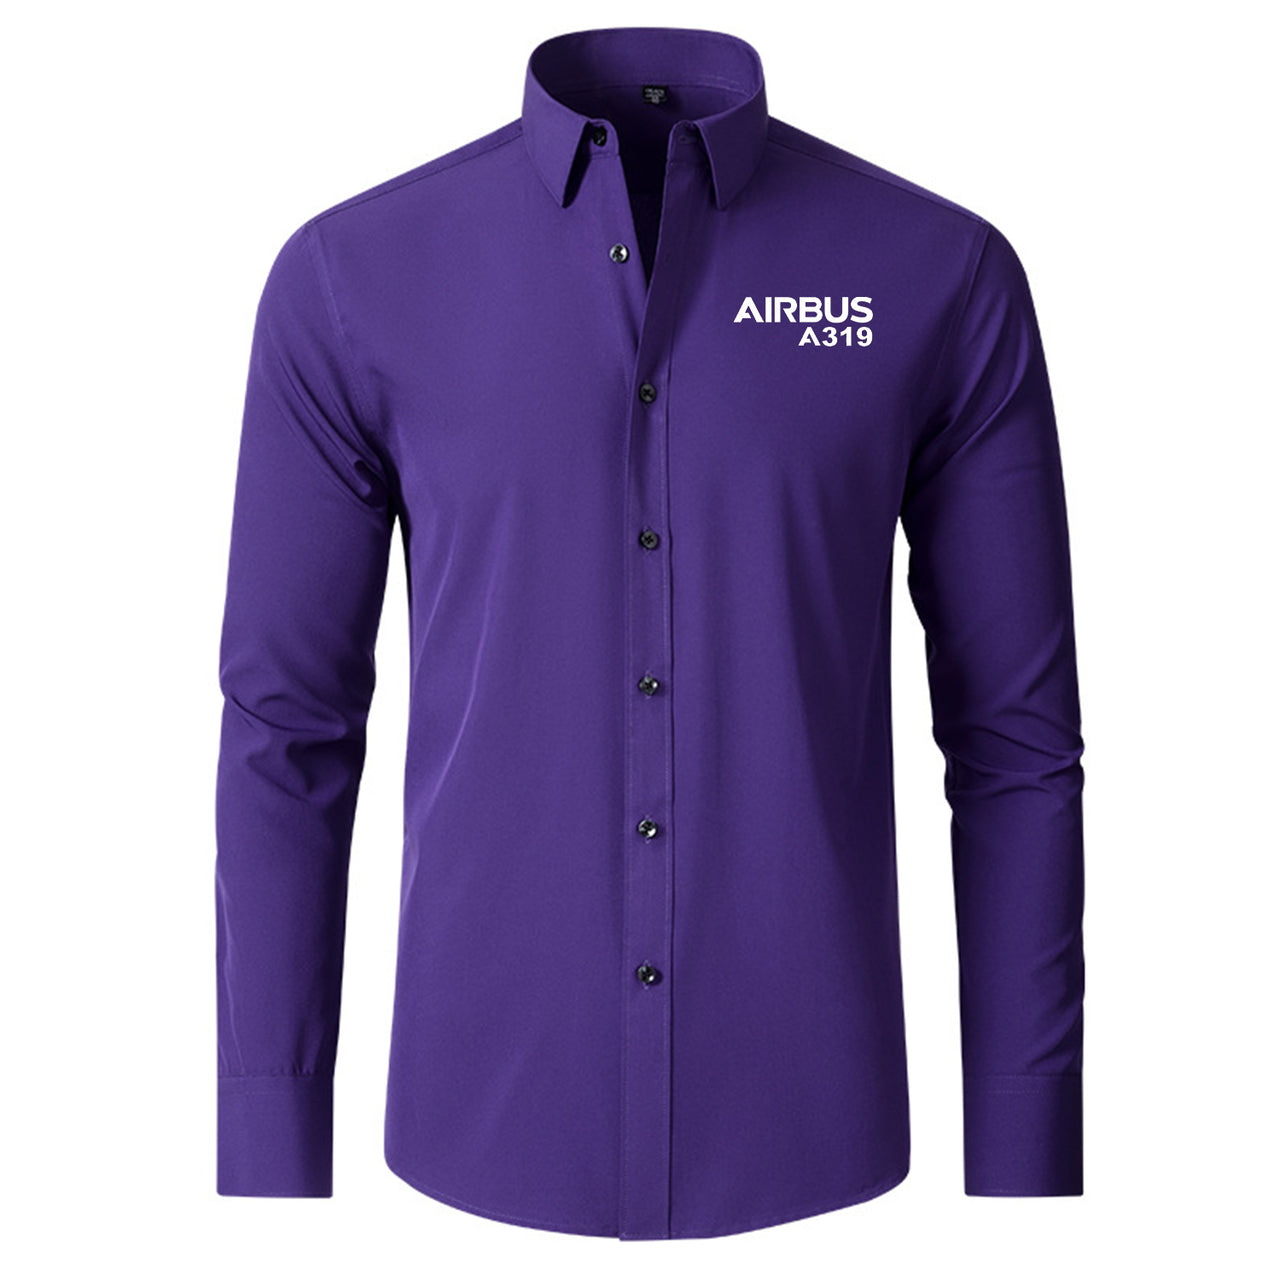 Airbus A319 & Text Designed Long Sleeve Shirts